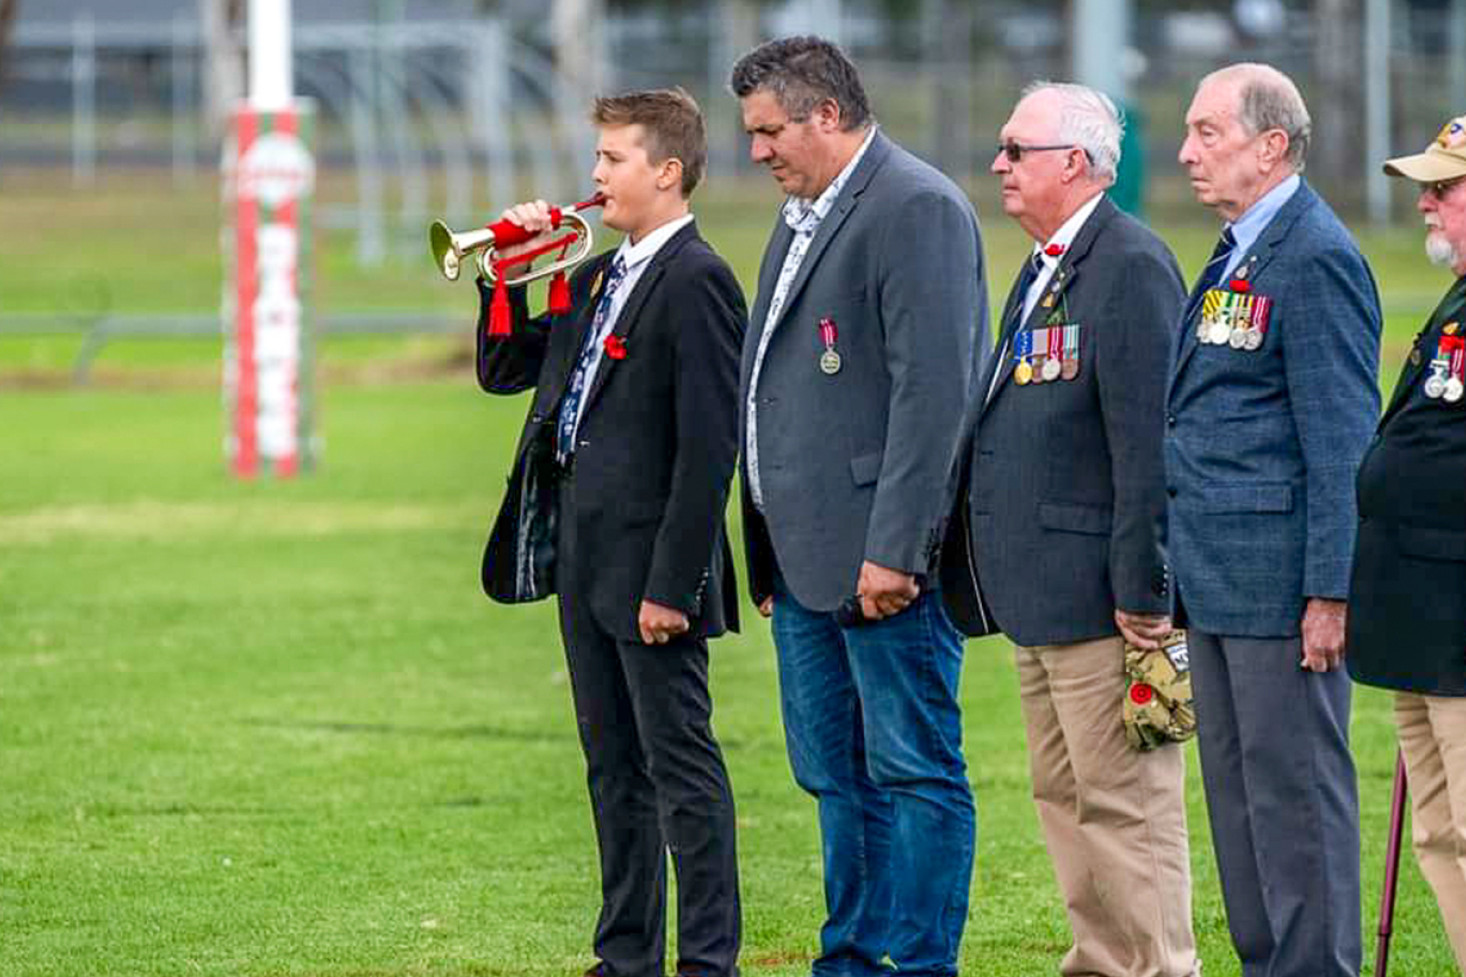 An ANZAC Day commemoration was held prior to the games commencing.